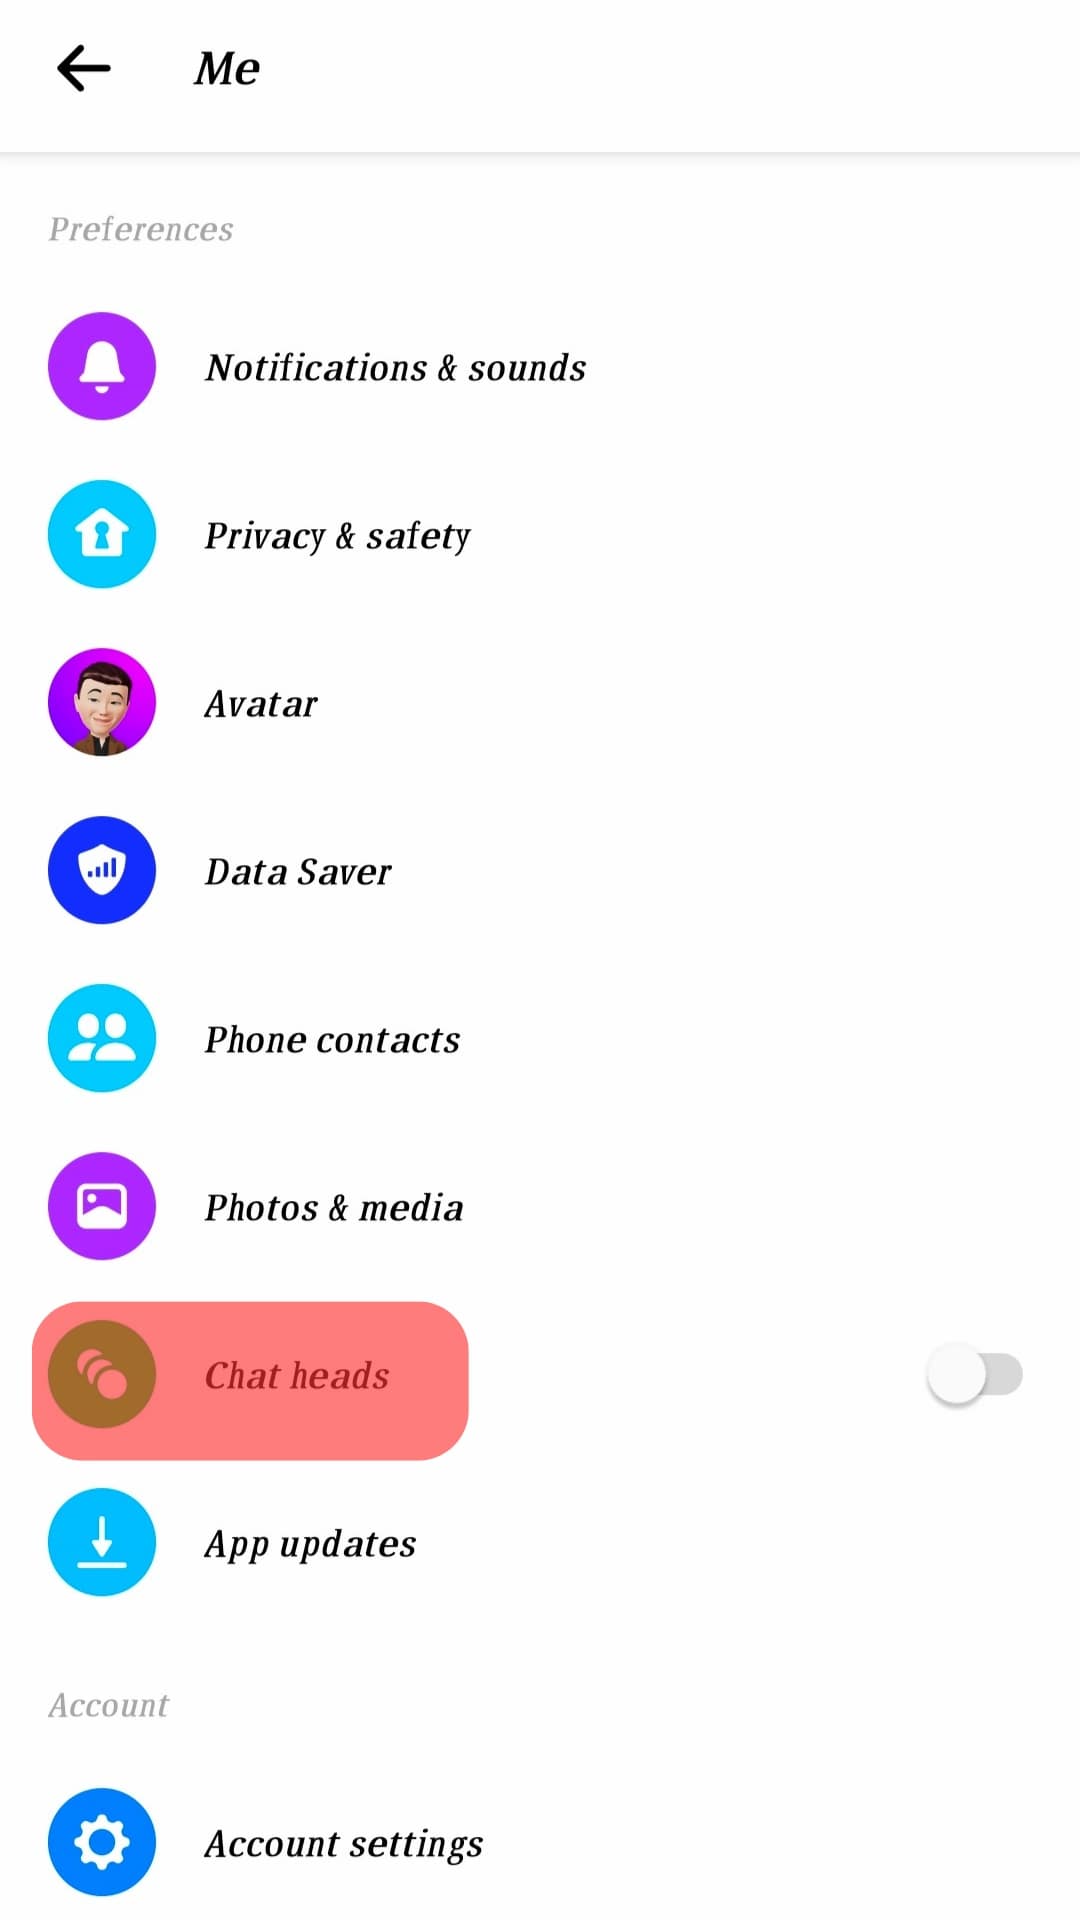 Tap On The Option For Chat Heads.